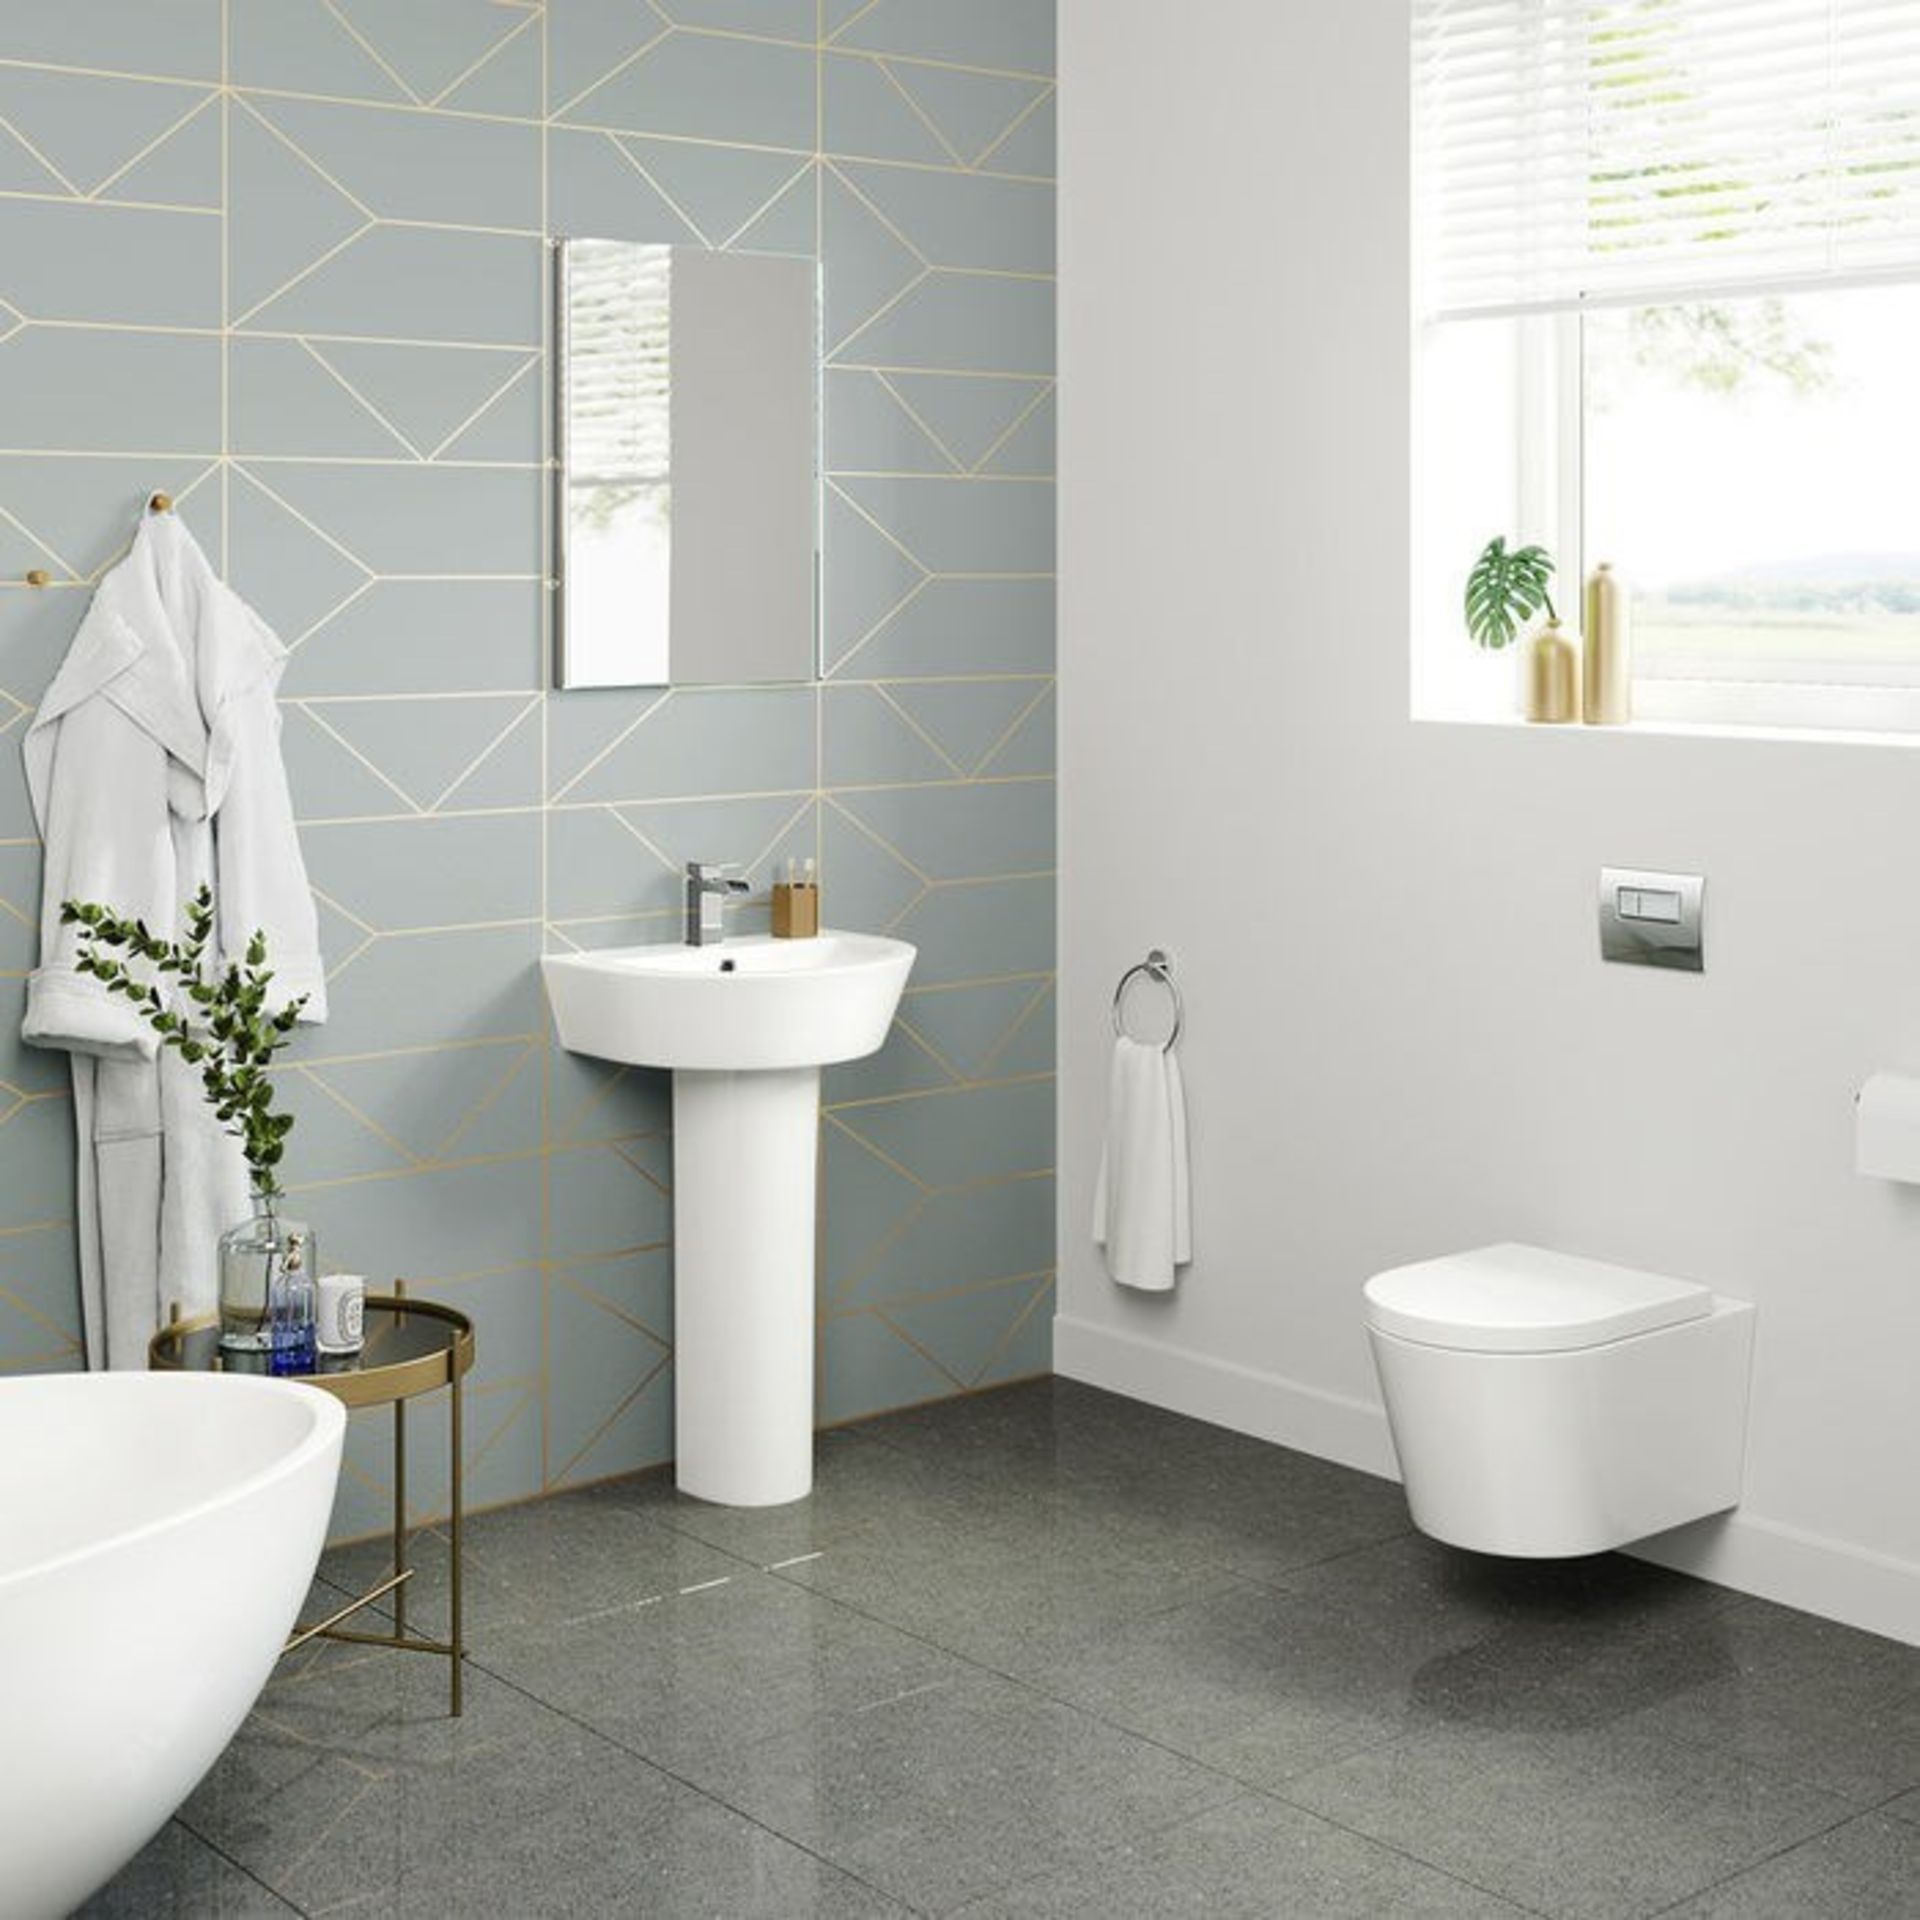 NEW & BOXED Lyon II Wall Hung Toilet inc Luxury Soft Close Seat.RRP £349.99 each. We lov... - Image 2 of 2